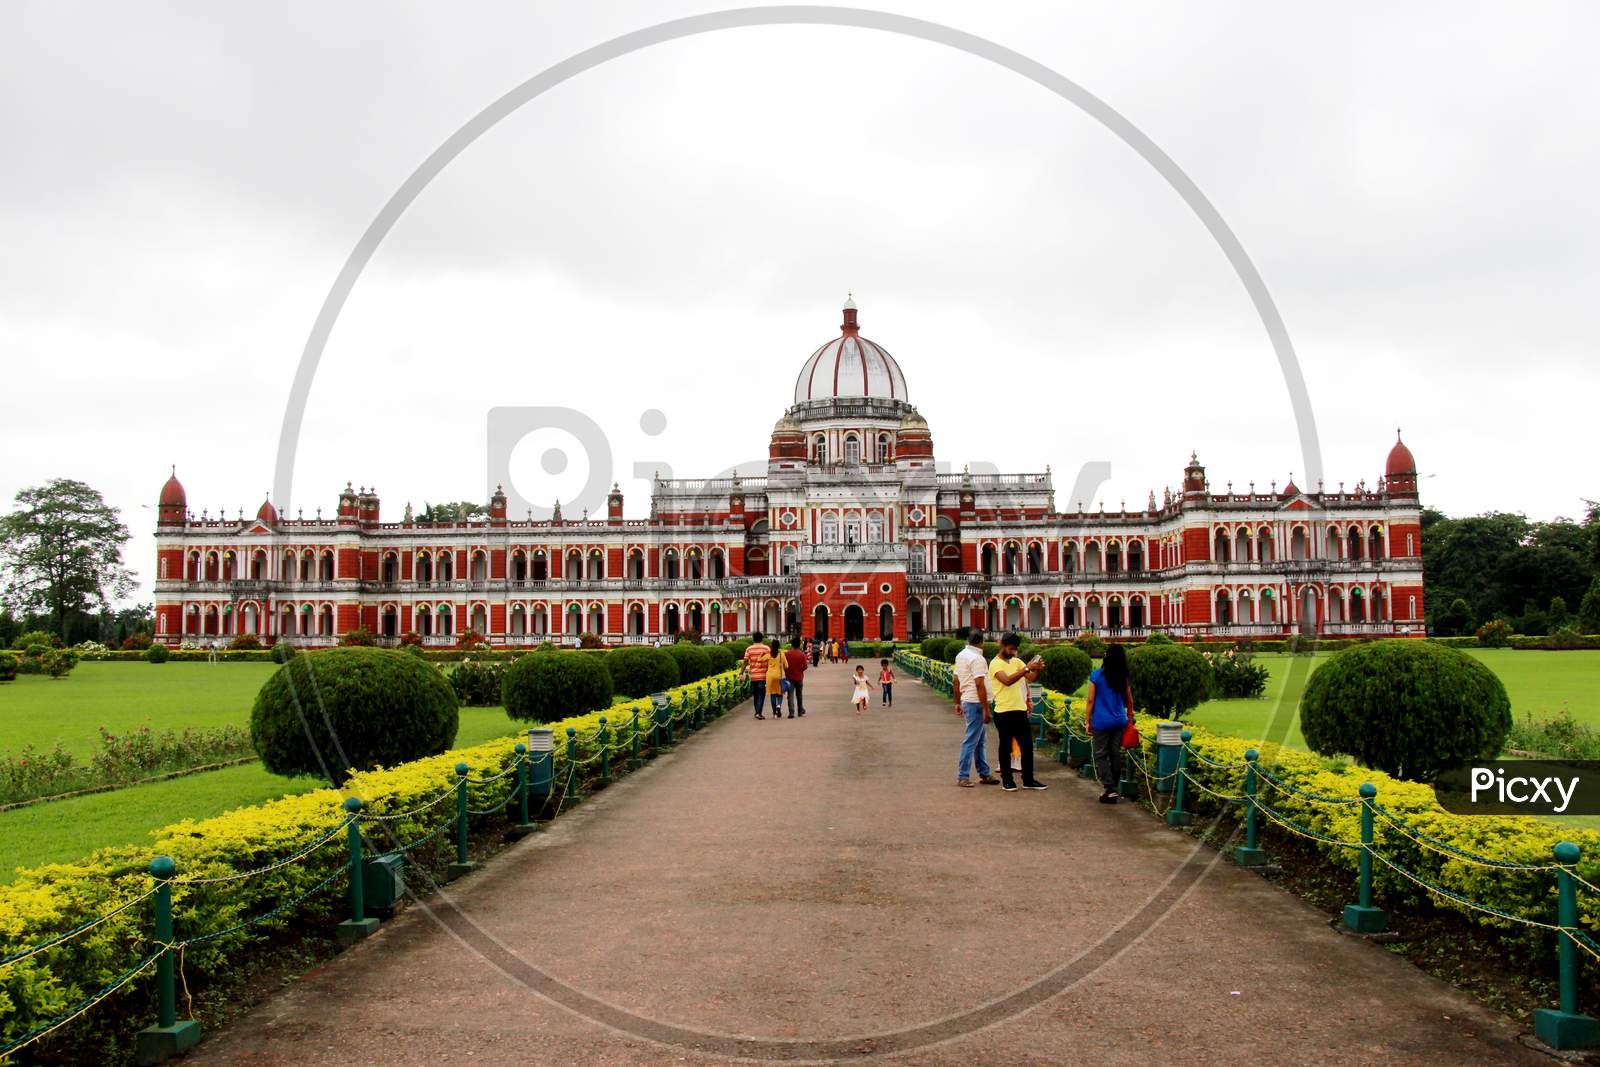 Cooch Behar, West Bengal, India on 11th October, 2016 : Cooch Behar Palace, also called the Victor Jubilee Palace. Ancient architecture. Cooch Behar Rajbari in West Bengal, India